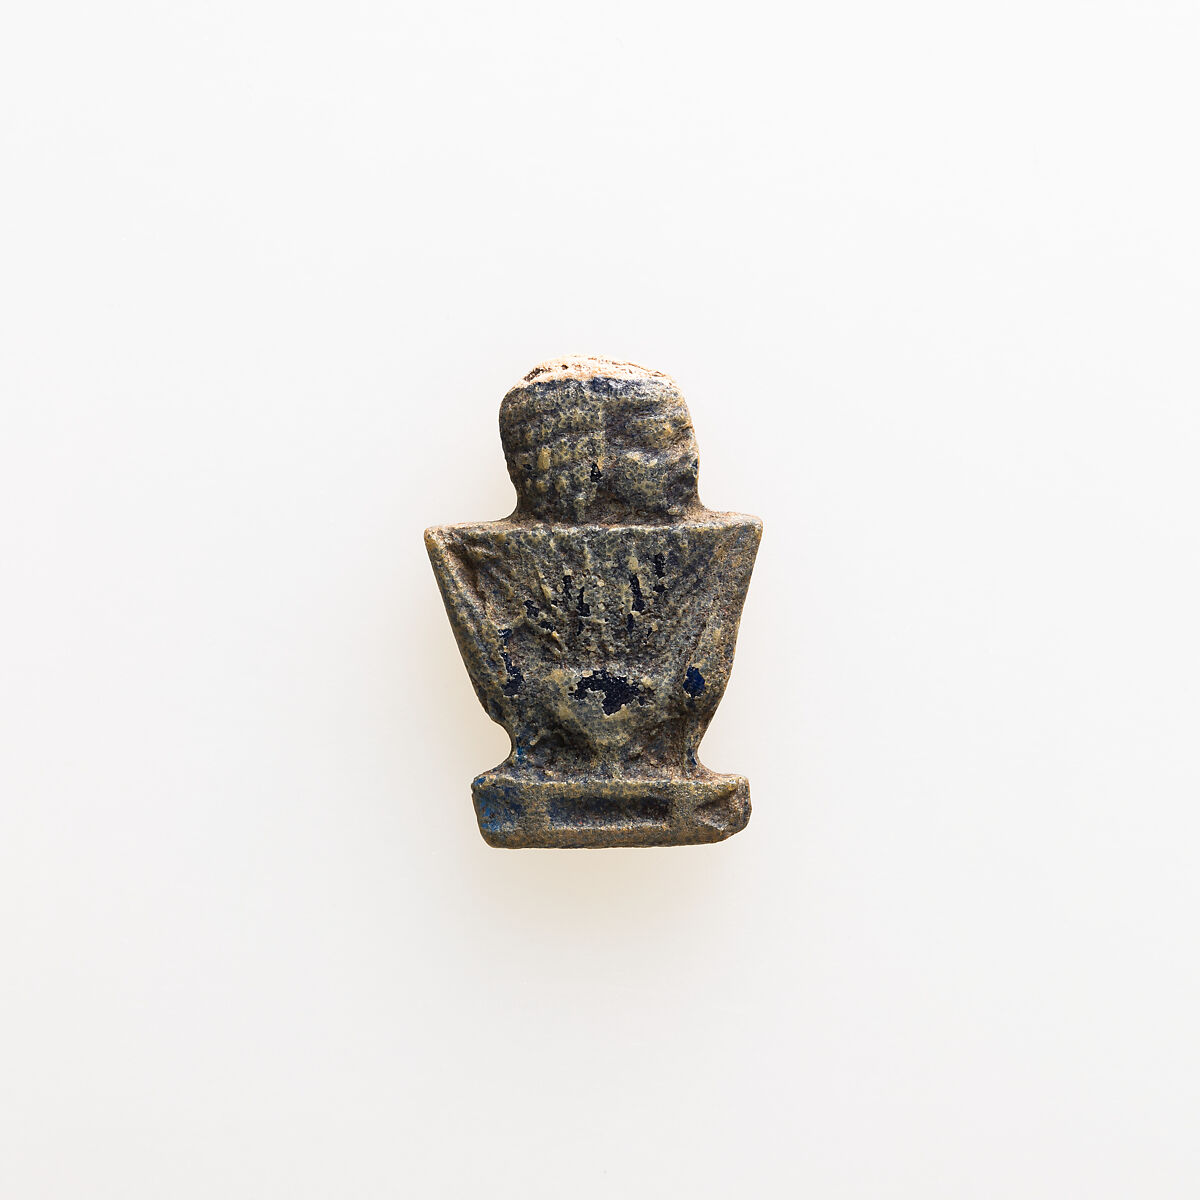 Amulet depicting human head emerging from lotus, Glass 